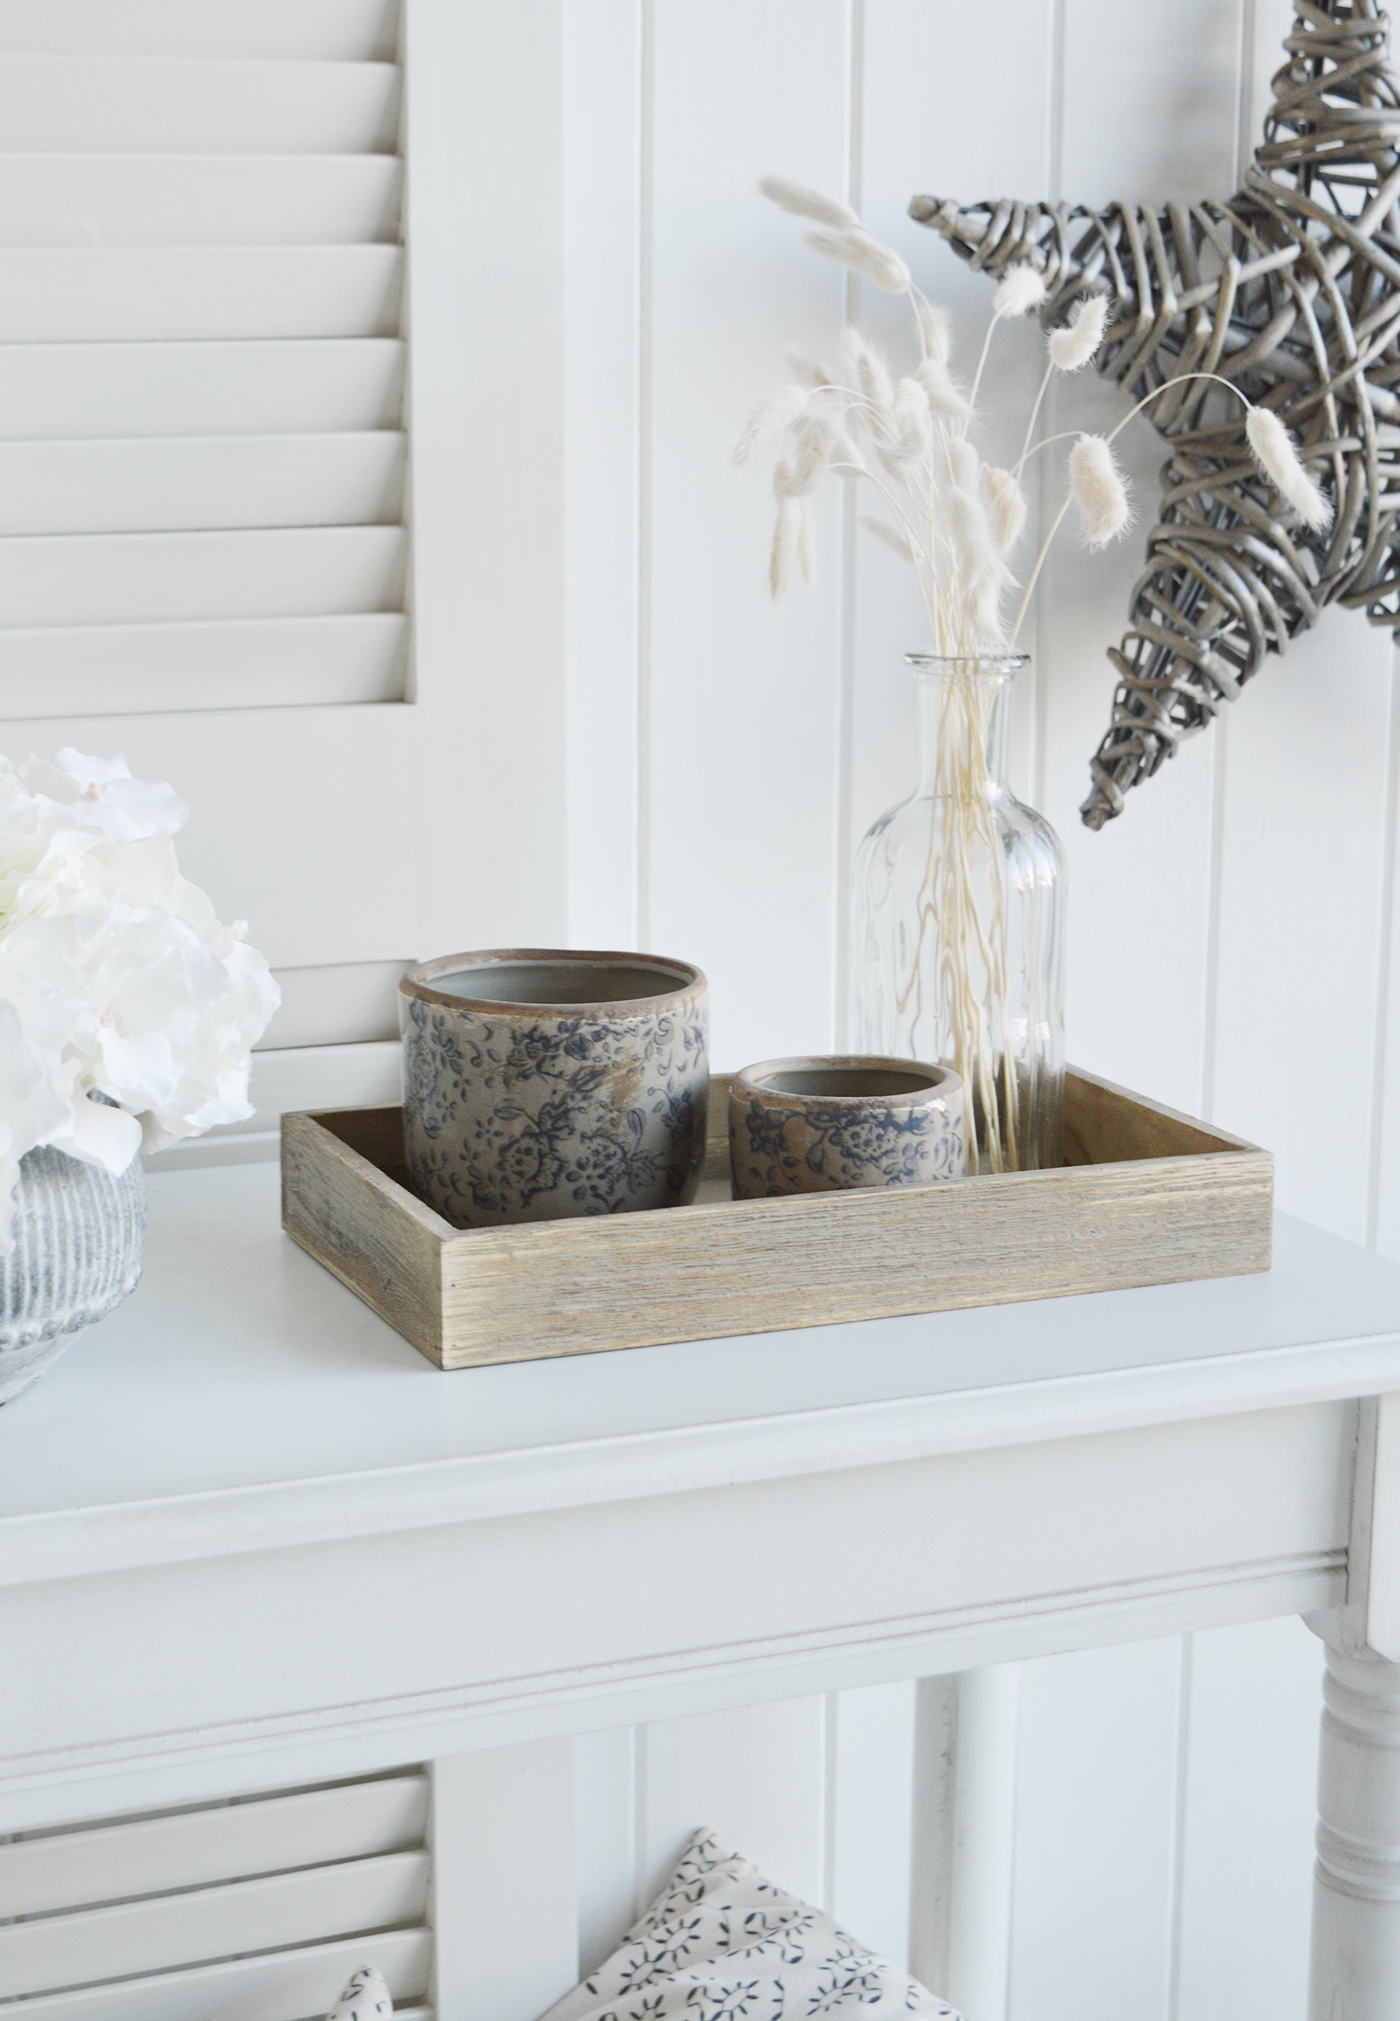 The White Lighthouse. White Furniture and accessories for the home. Jackson Weathered Effect Tray - Coffee Table, Shelf and Console styling for New England, Country Farmhouse and coastal home interior decor